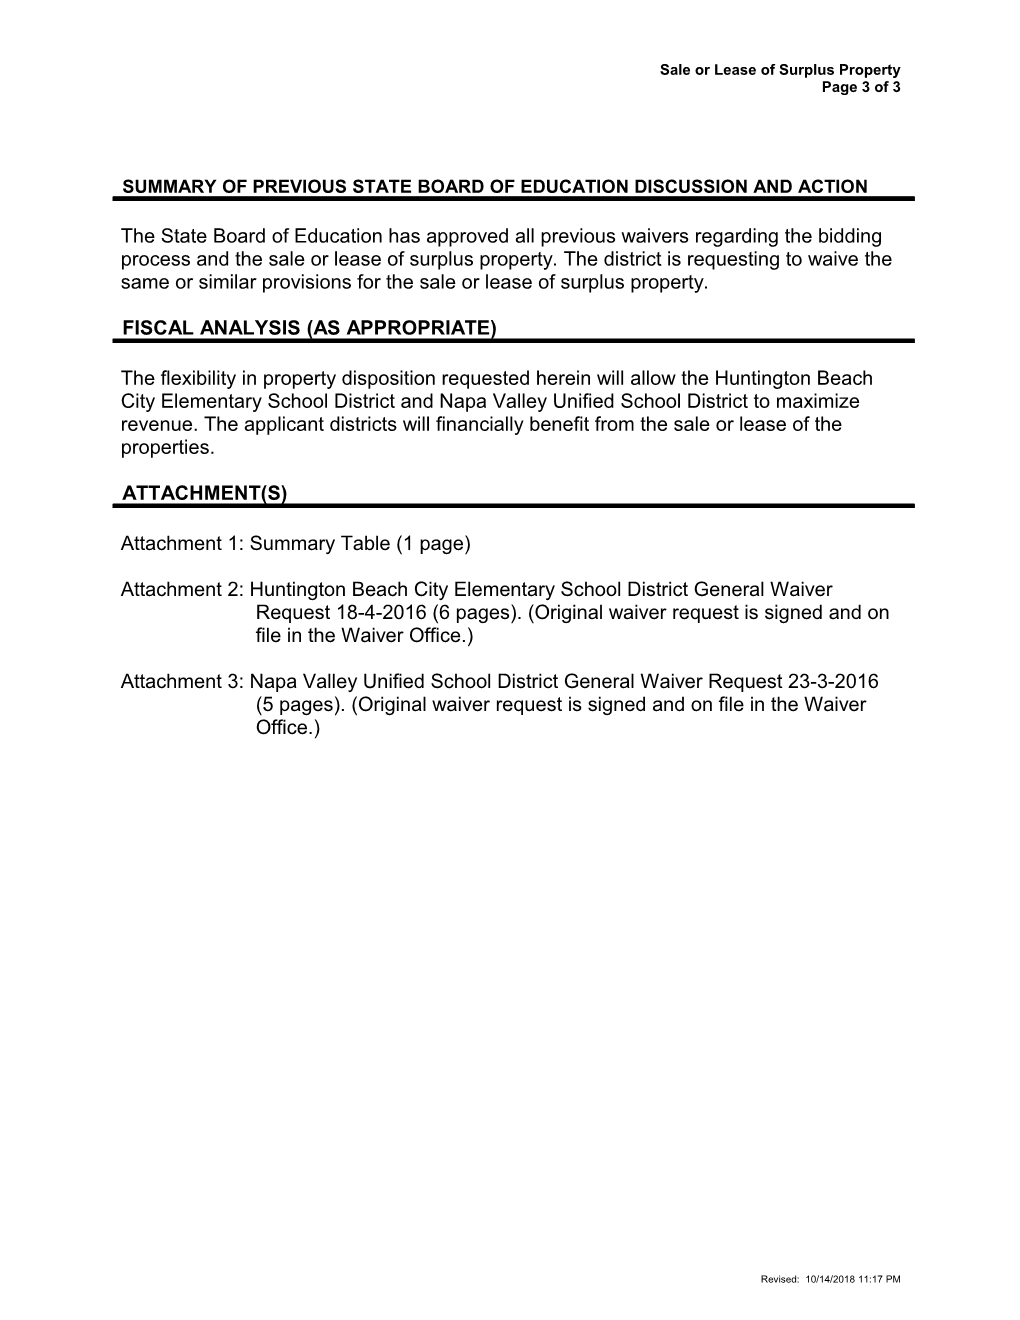 July 2016 Waiver Item W-09 - Meeting Agendas (CA State Board of Education)